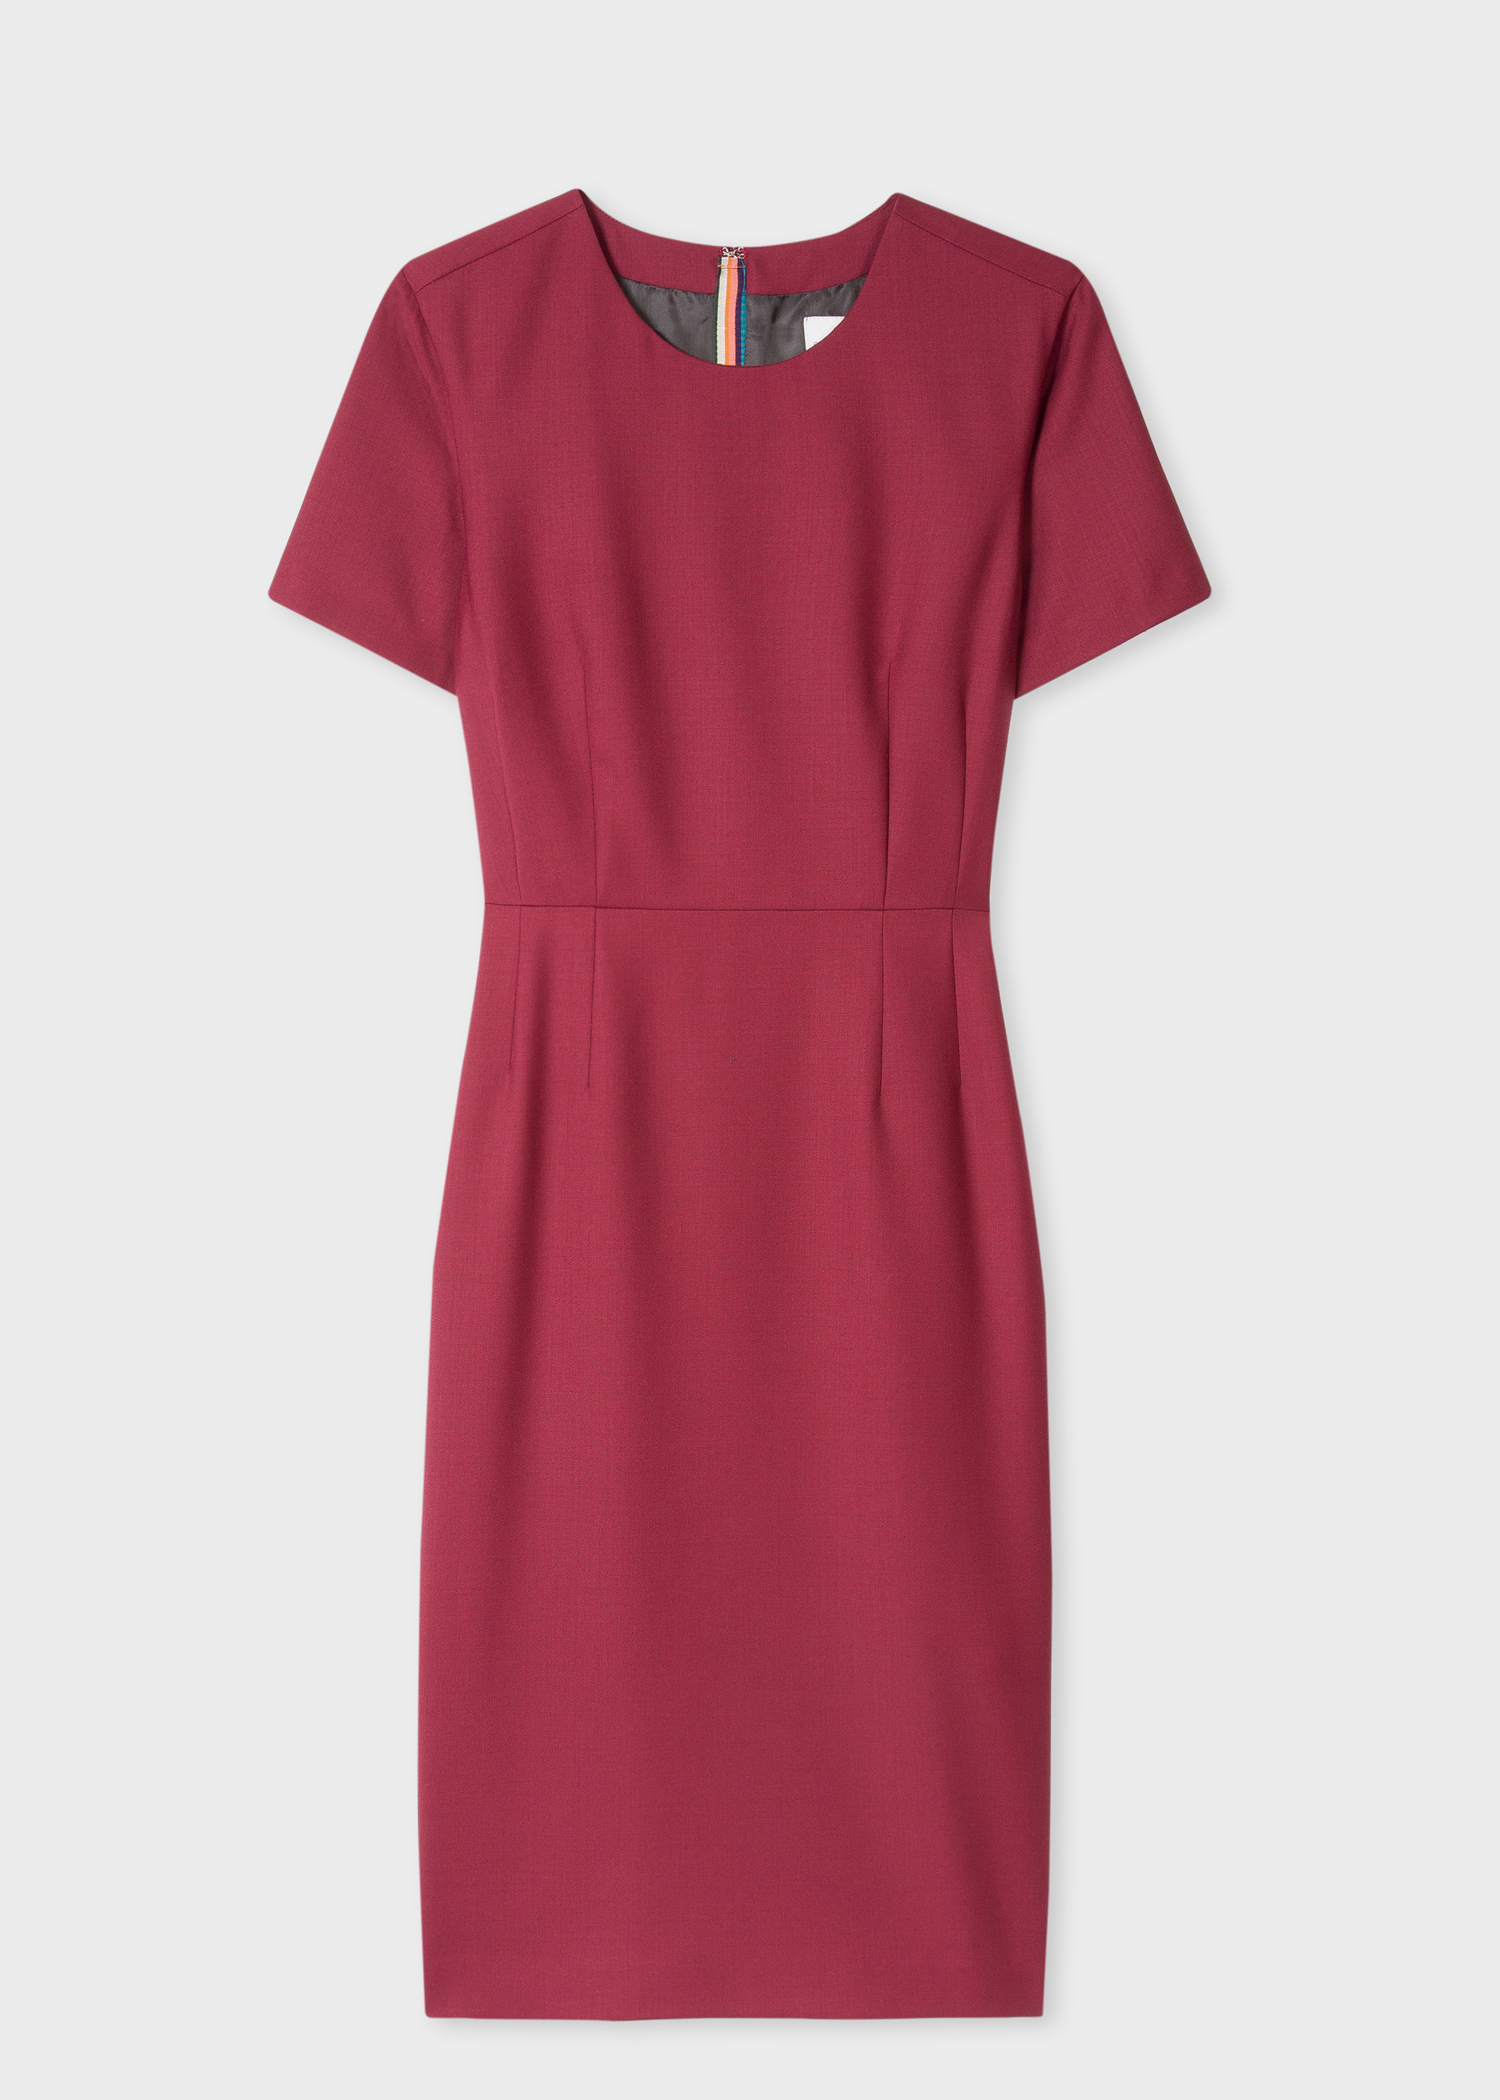 Front view - Women's Burgundy Wool-Twill 'A Dress To Travel In' Paul Smith